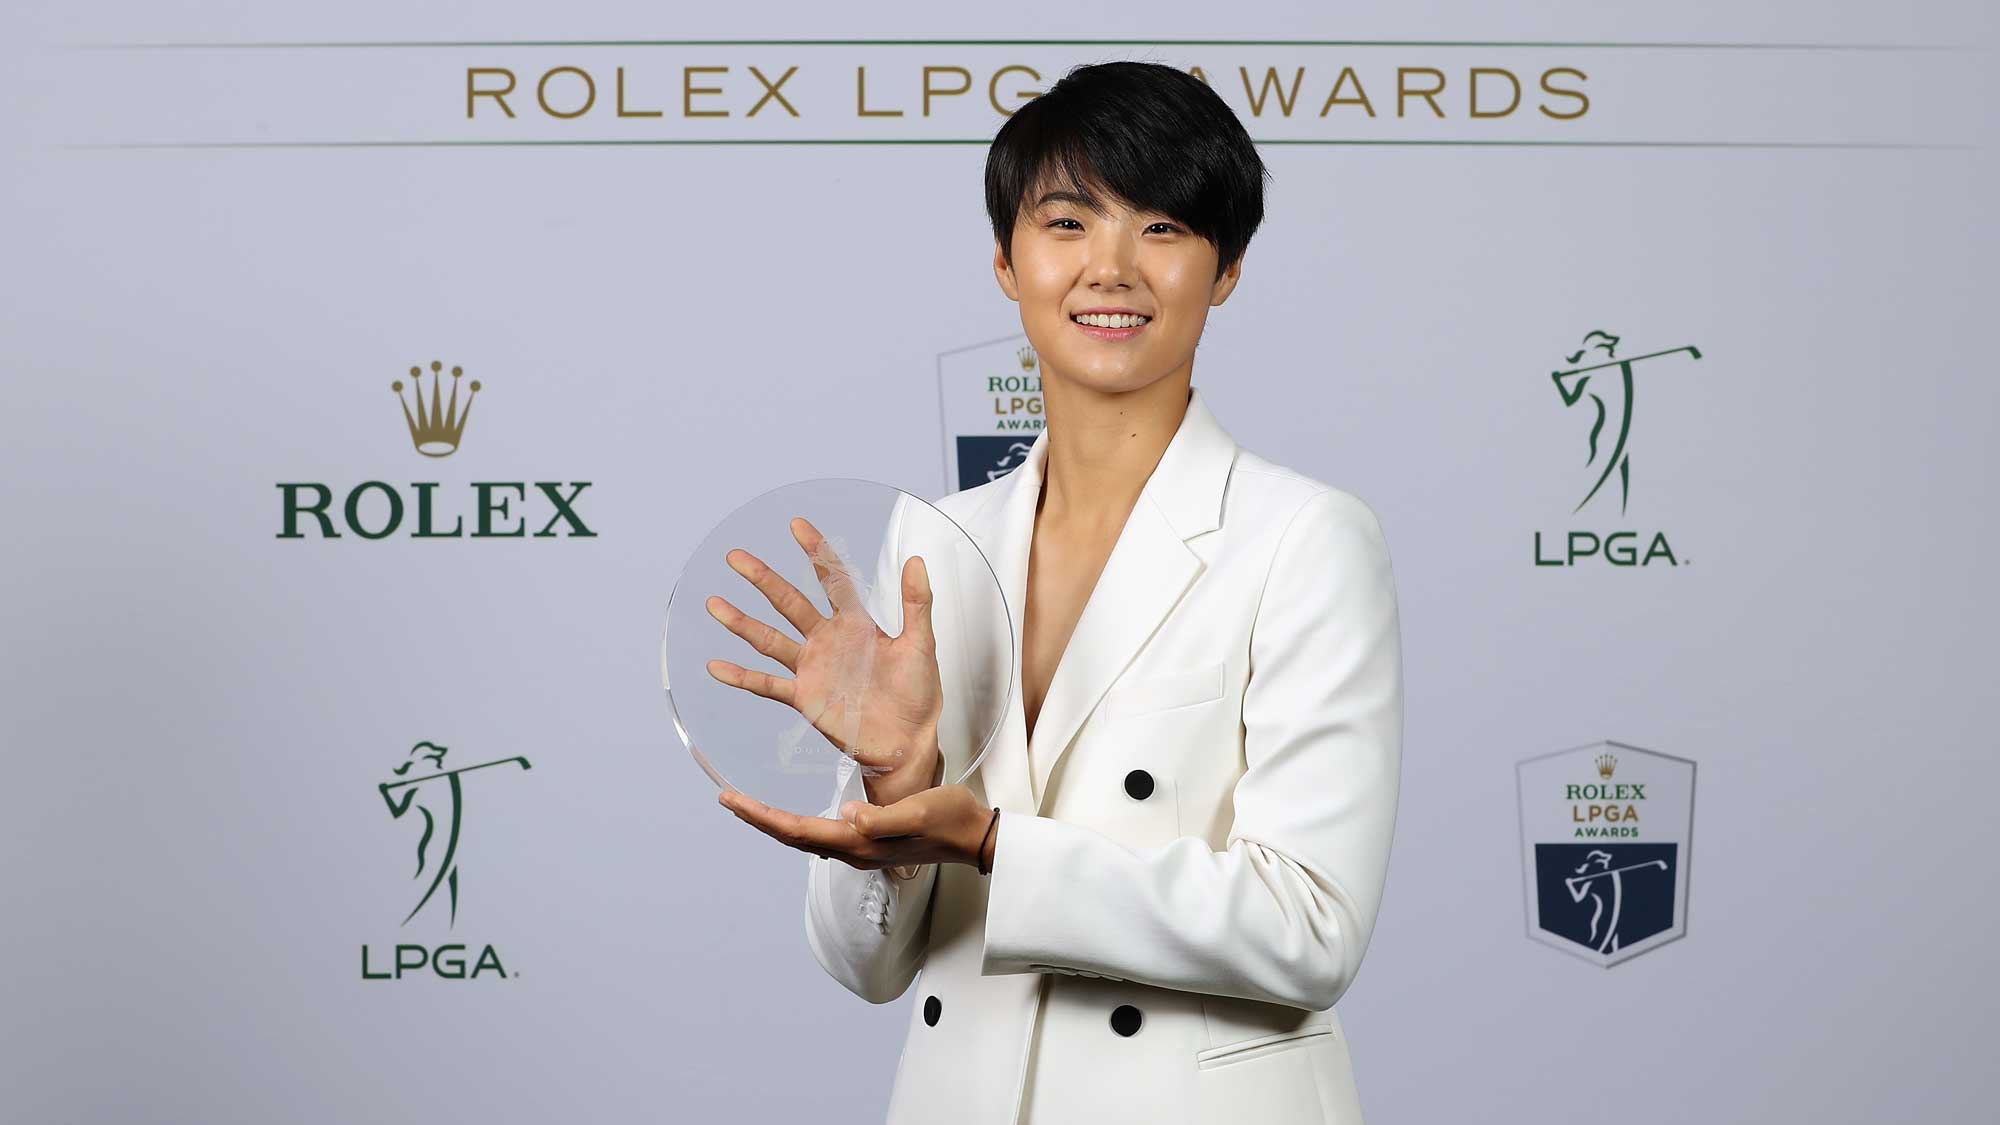 Louise Suggs Rolex Rookie of the Year award recipient Sung Hyun Park of Korea poses for a portrait during the LPGA Rolex Players Awards at The Ritz-Carlton Golf Resort